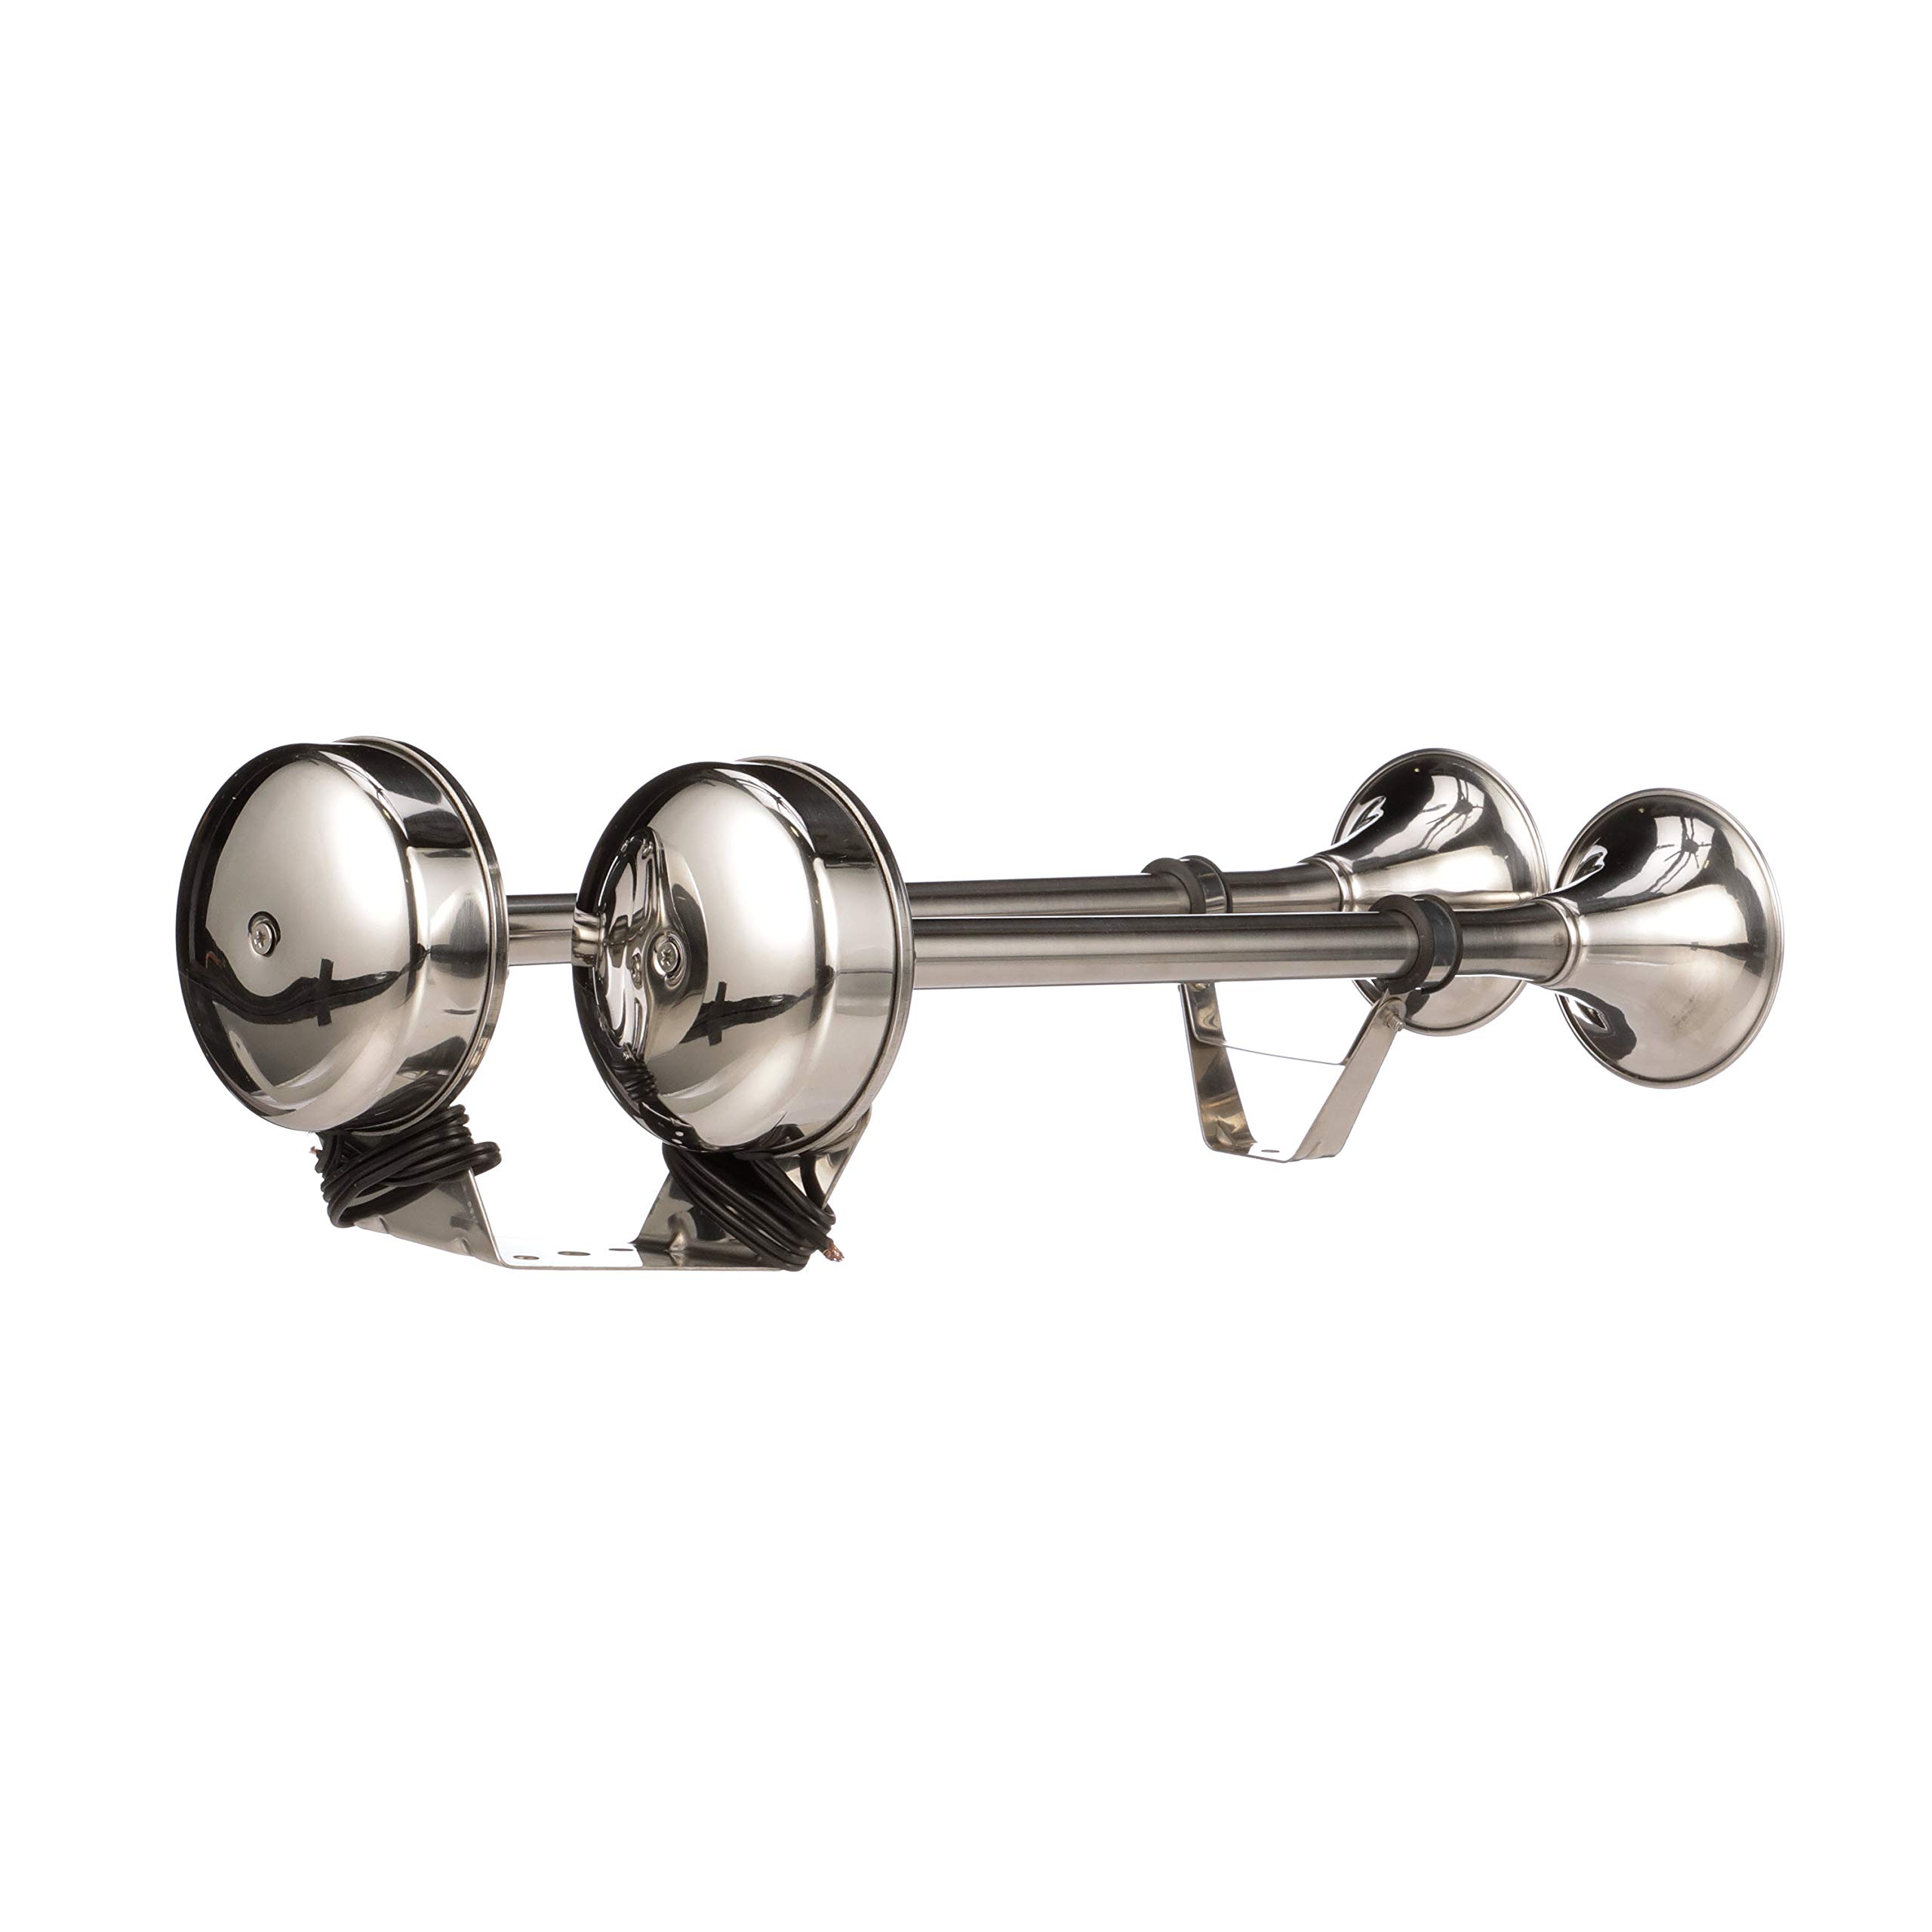 Seachoice Stainless Steel Dual Trumpet Horn, Vibration-Free Mounting Pad, 20-3/4 in. Long, 12V